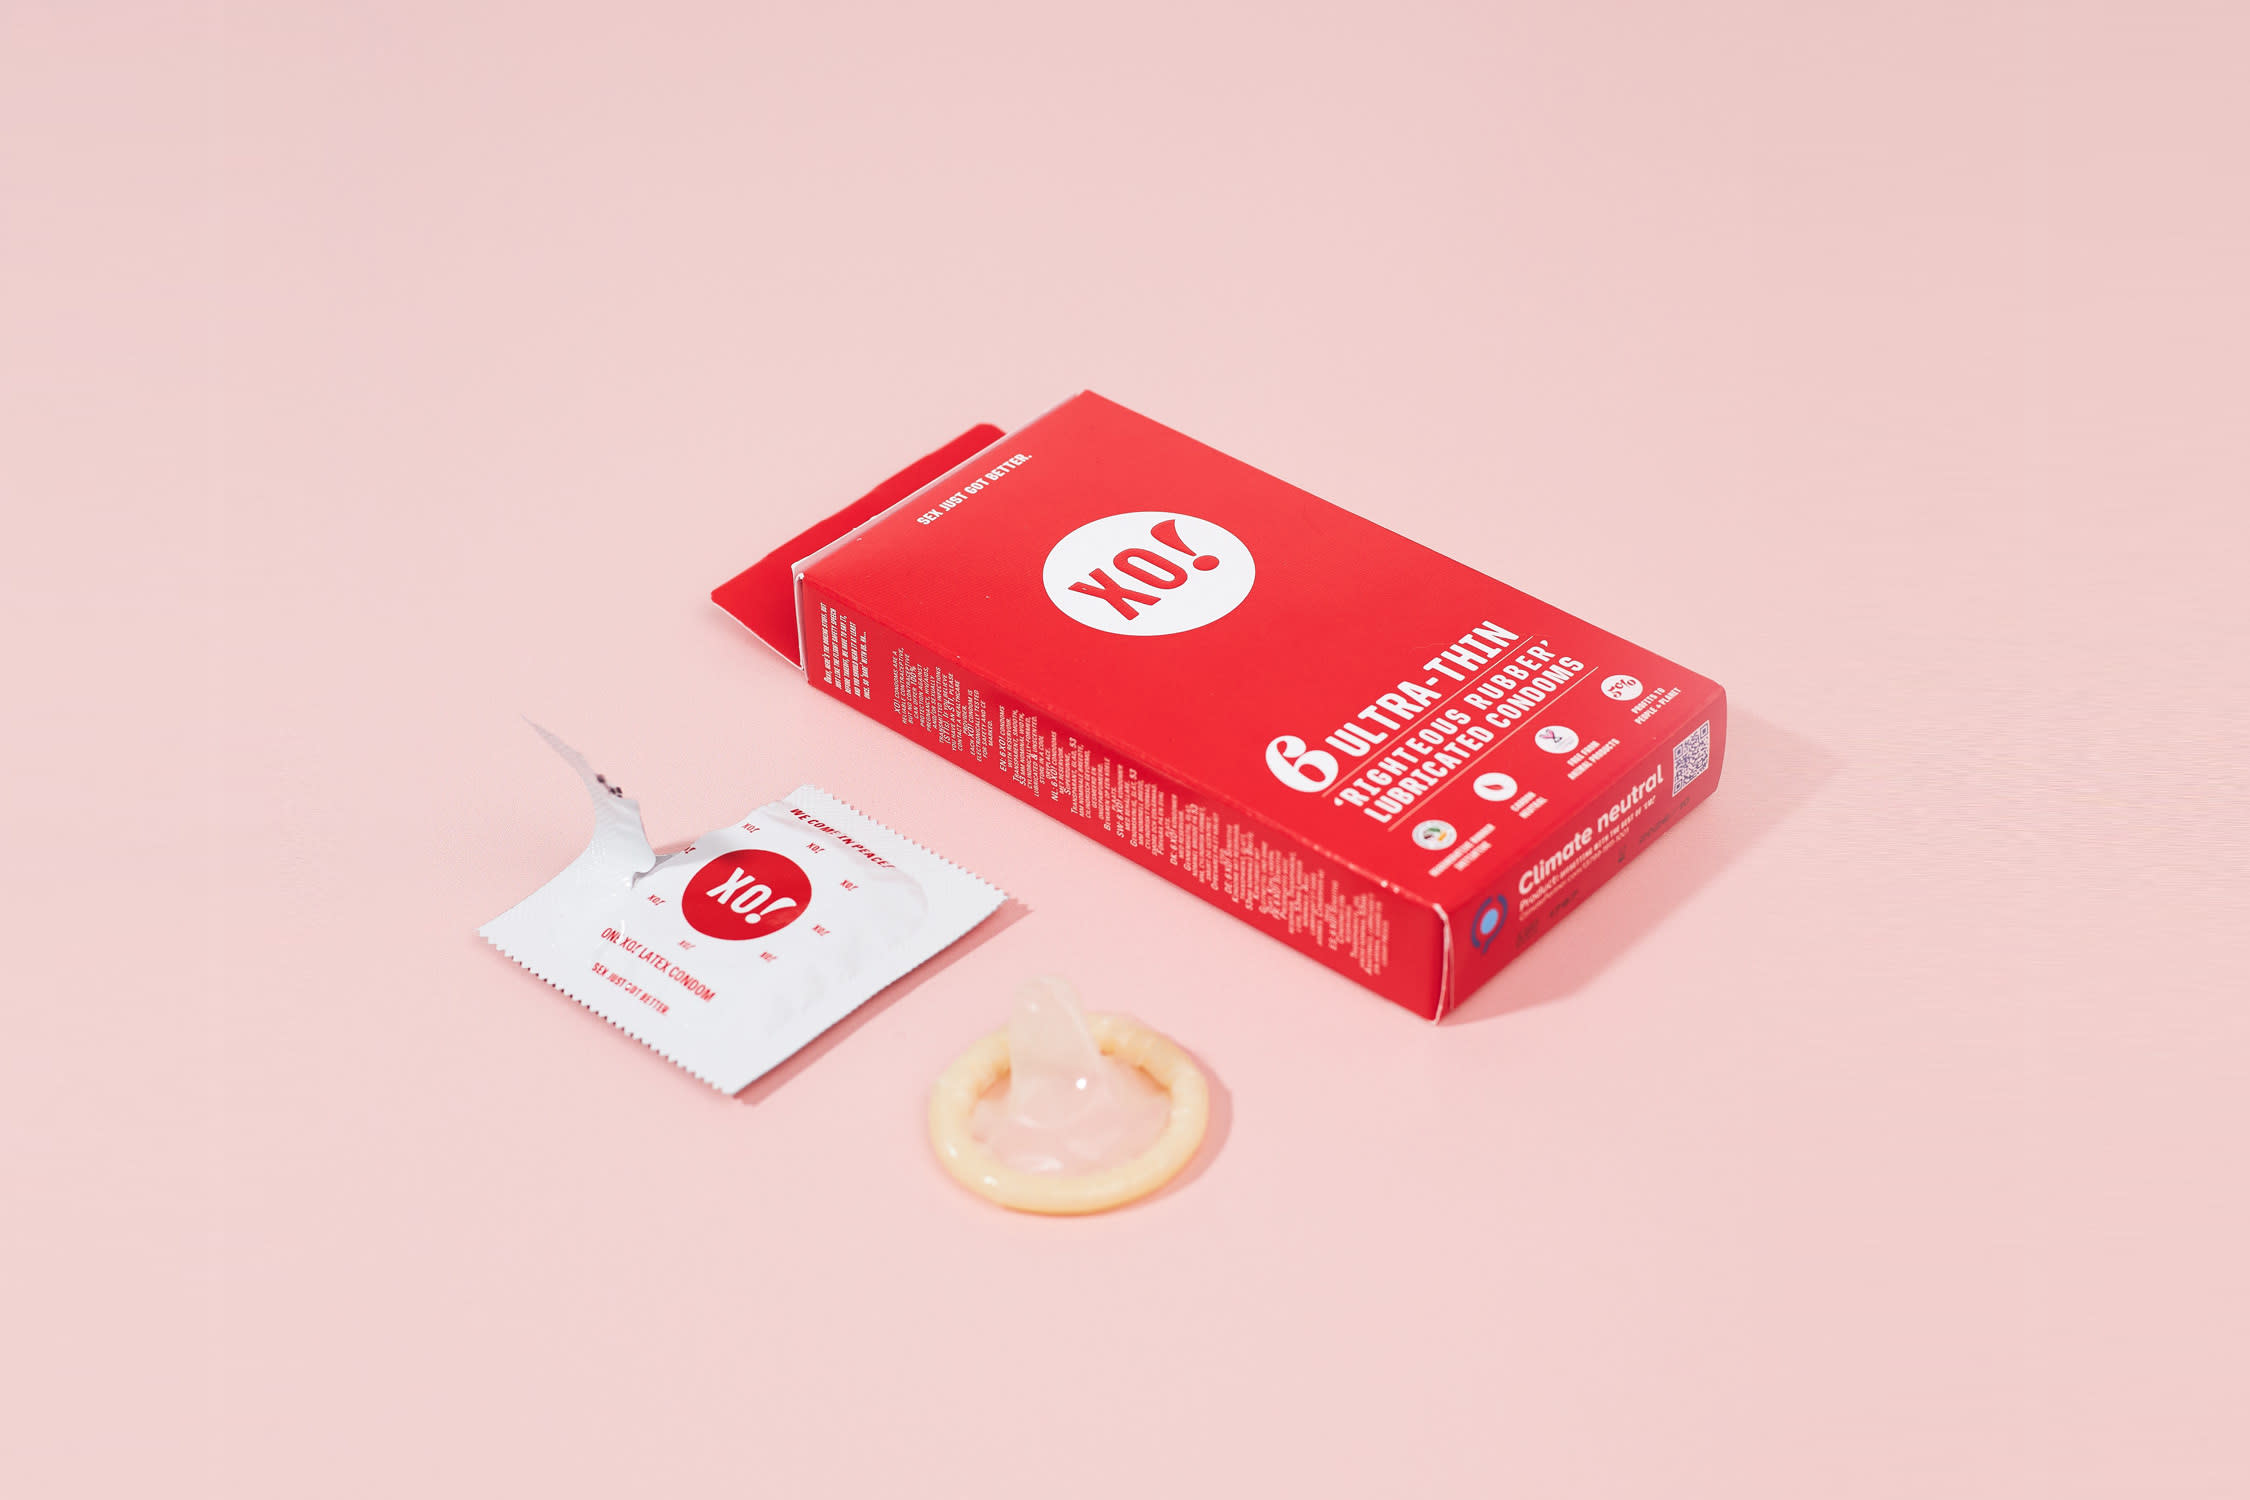 A red box of condoms on a pale pink background. One condom has been removed from the pack and taken out of the foil wrapper. The wrapper and condom sit next to the box.